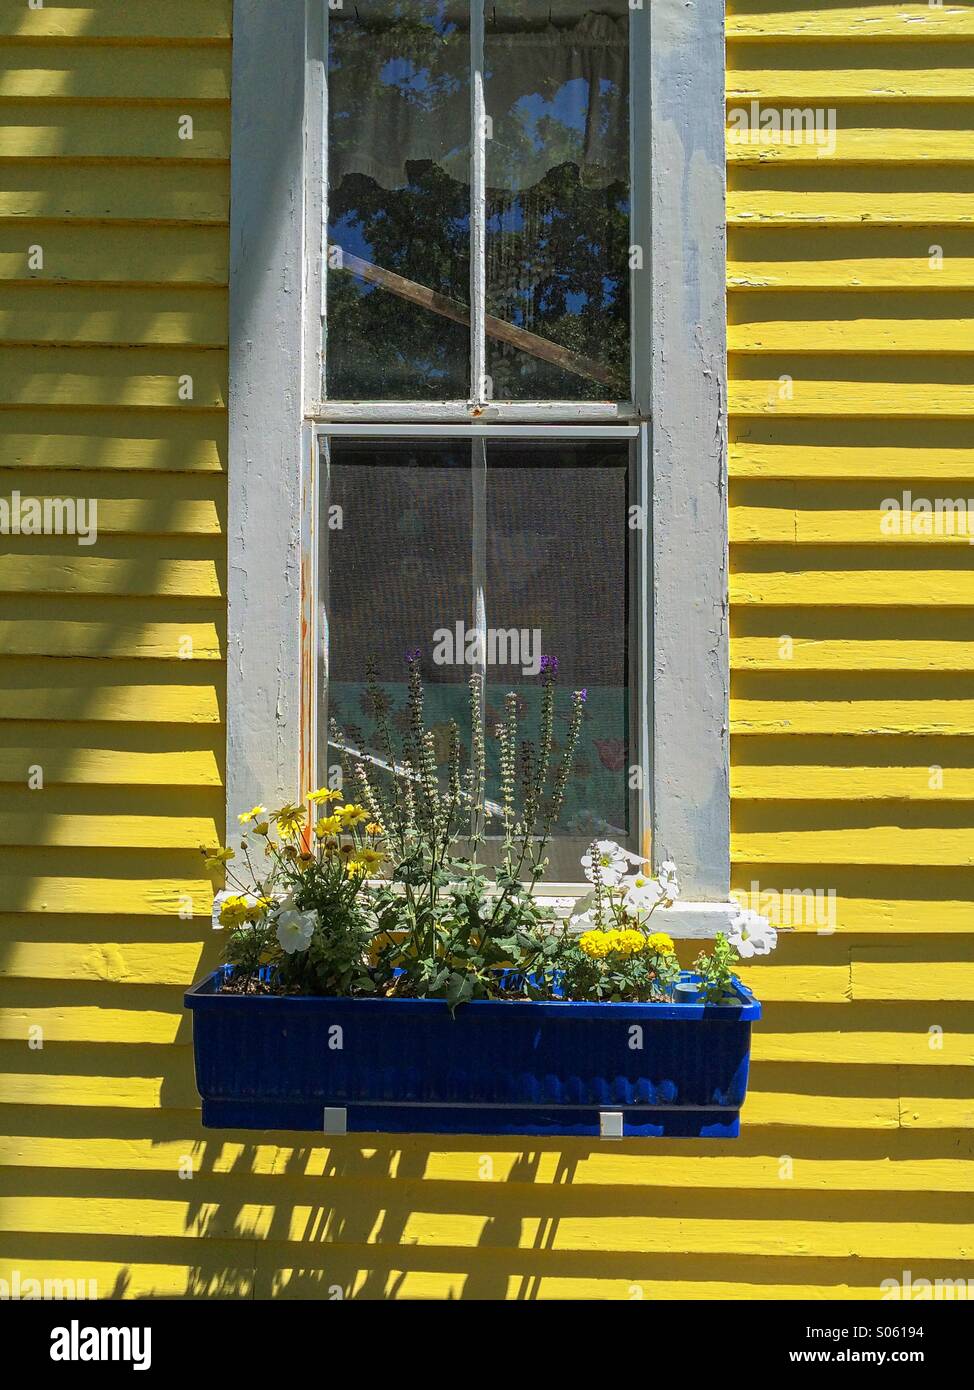 Yellow slats with white window frame and blue window flower box containing flowers in Camp Meeting Grounds Oak Bluffs Massachusetts Stock Photo